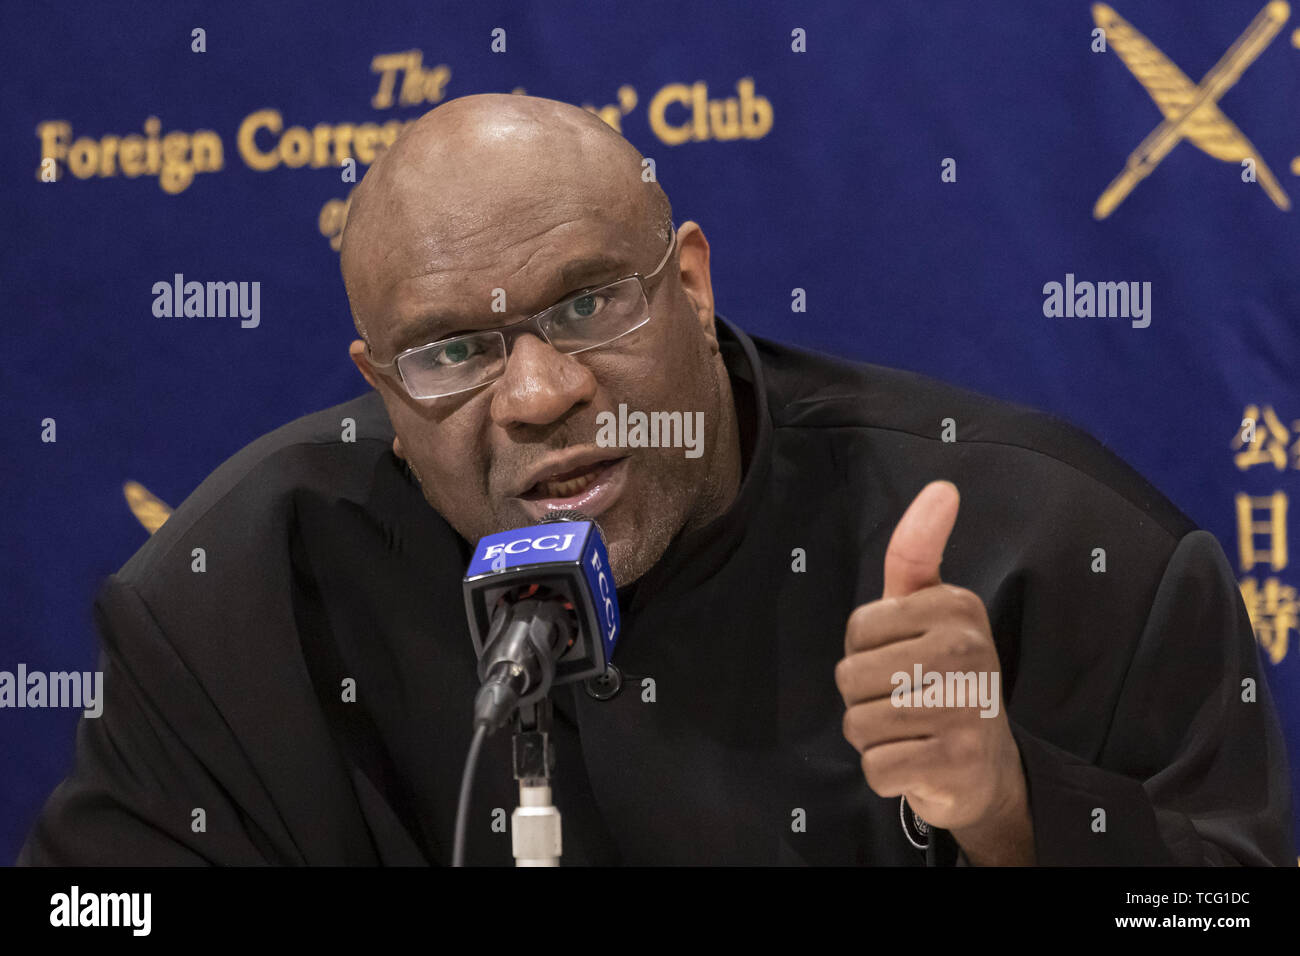 Tokyo, Japan. 7th June, 2019. American pro fighter and actor Bob Sapp speaks during a news conference at The Foreign Correspondents' Club of Japan in downtown Tokyo. Sapp, who is also a former American NFL player, WWE professional wrestler and World Champion kick boxer visited the Club to share his opinions about the Japanese TV industry as a foreigner celebrity in Japan. As actor he participated in several movies including 'Conan the Barbarian' and with Adam Sandler in 'The Longest Yard' Credit: Rodrigo Reyes Marin/ZUMA Wire/Alamy Live News Stock Photo